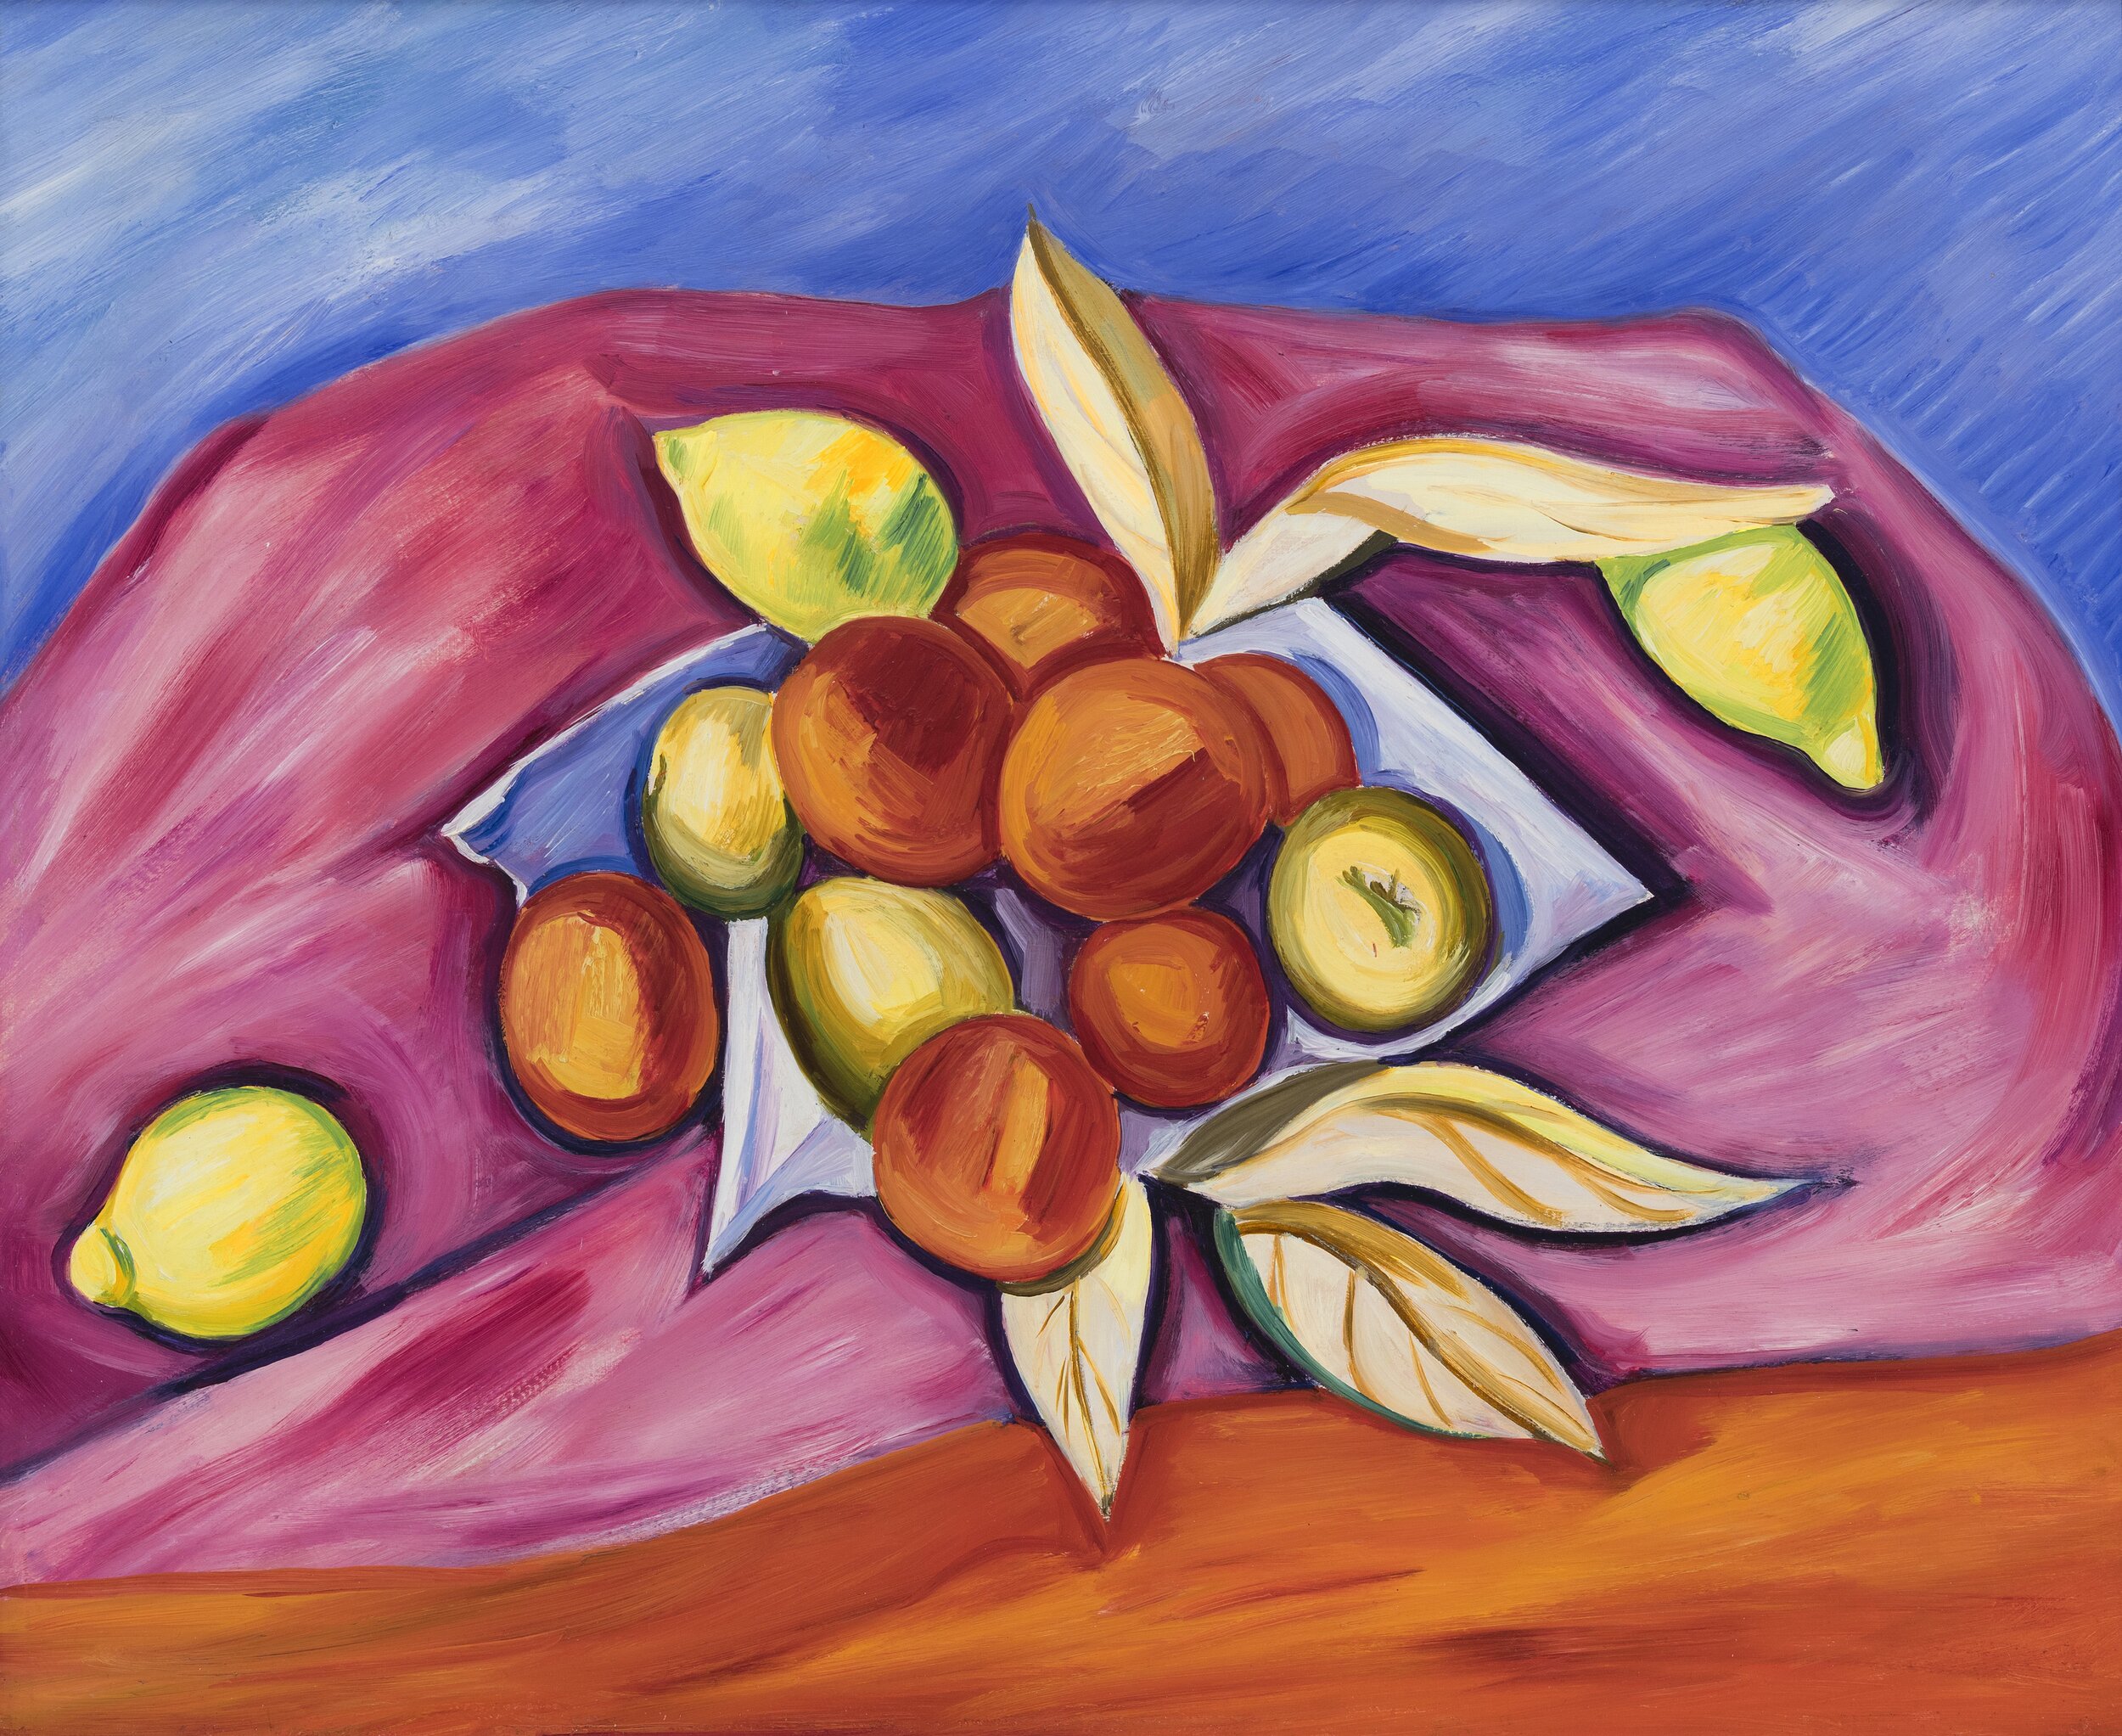 Still life with lemons and oranges on a pink cloth with orange and blue